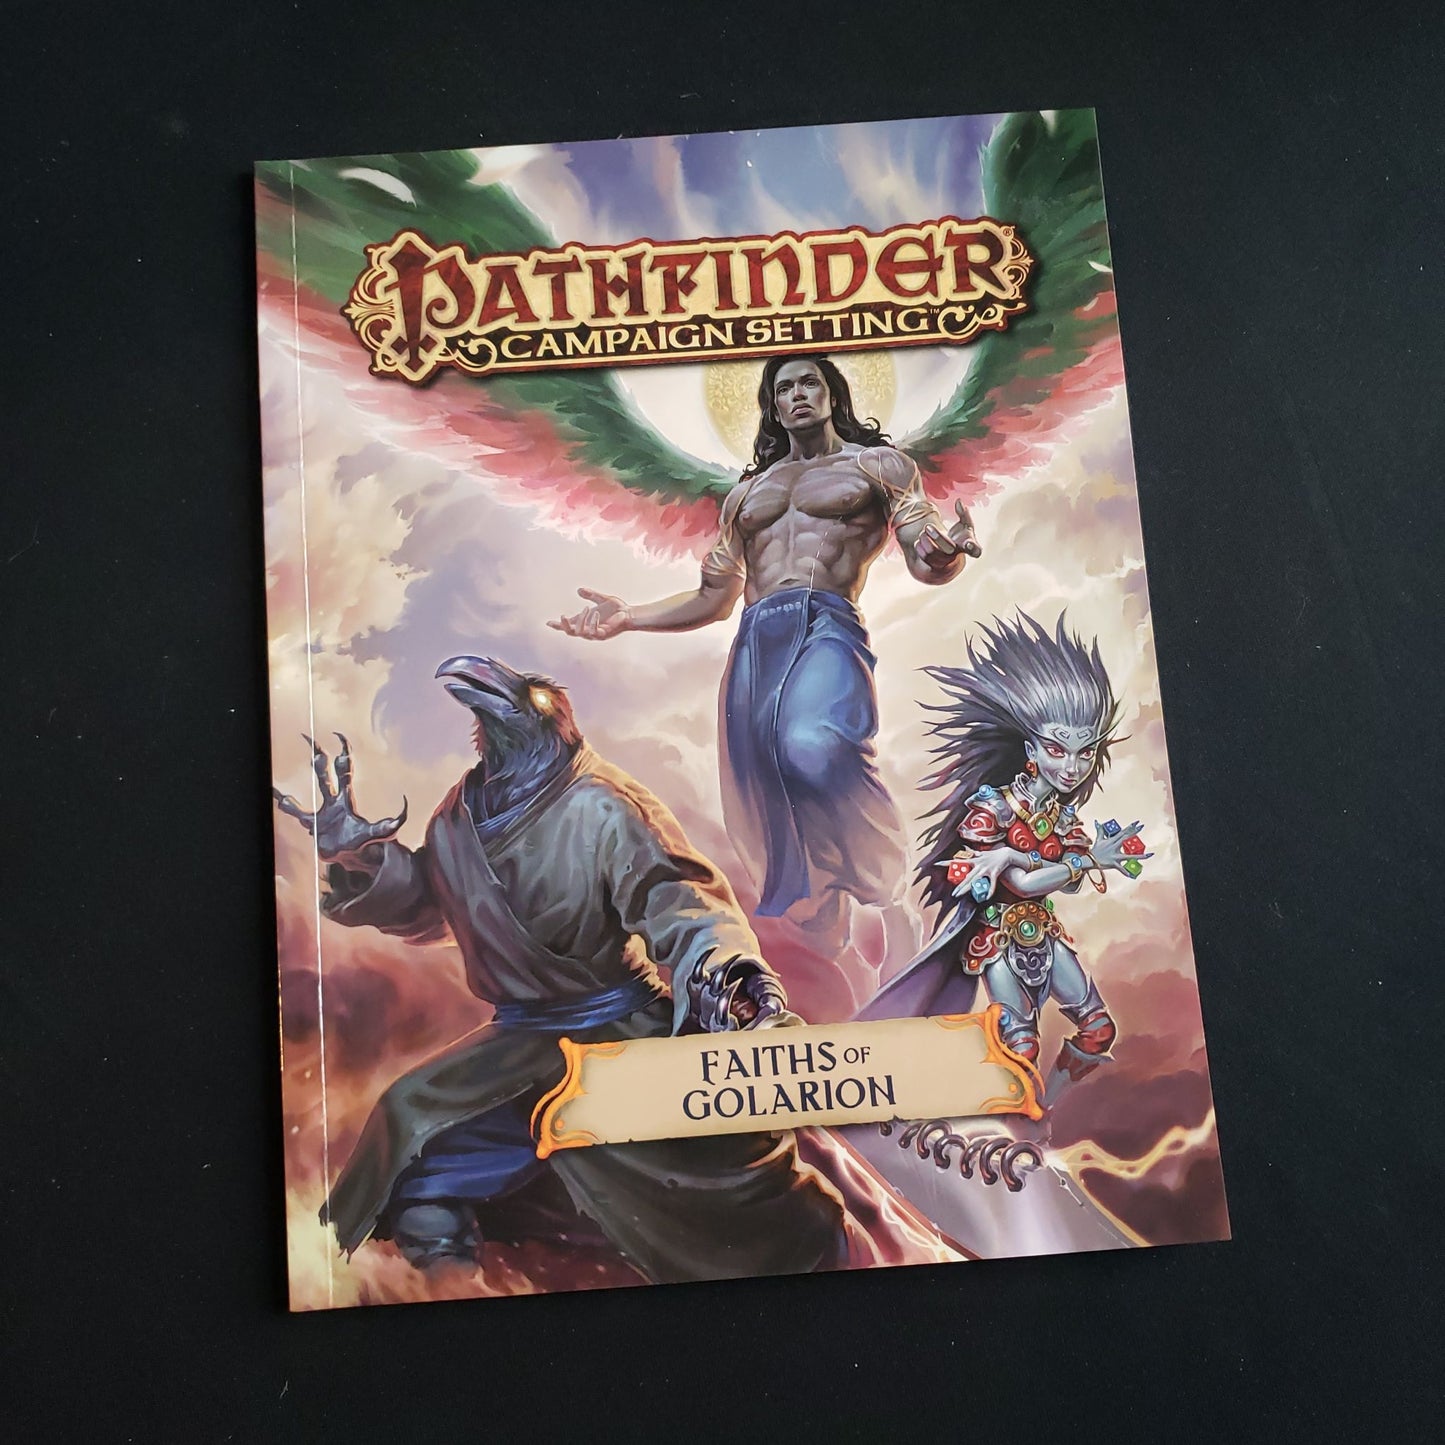 Image shows the front cover of the faiths of Golarion book for the Pathfinder First Edition roleplaying game